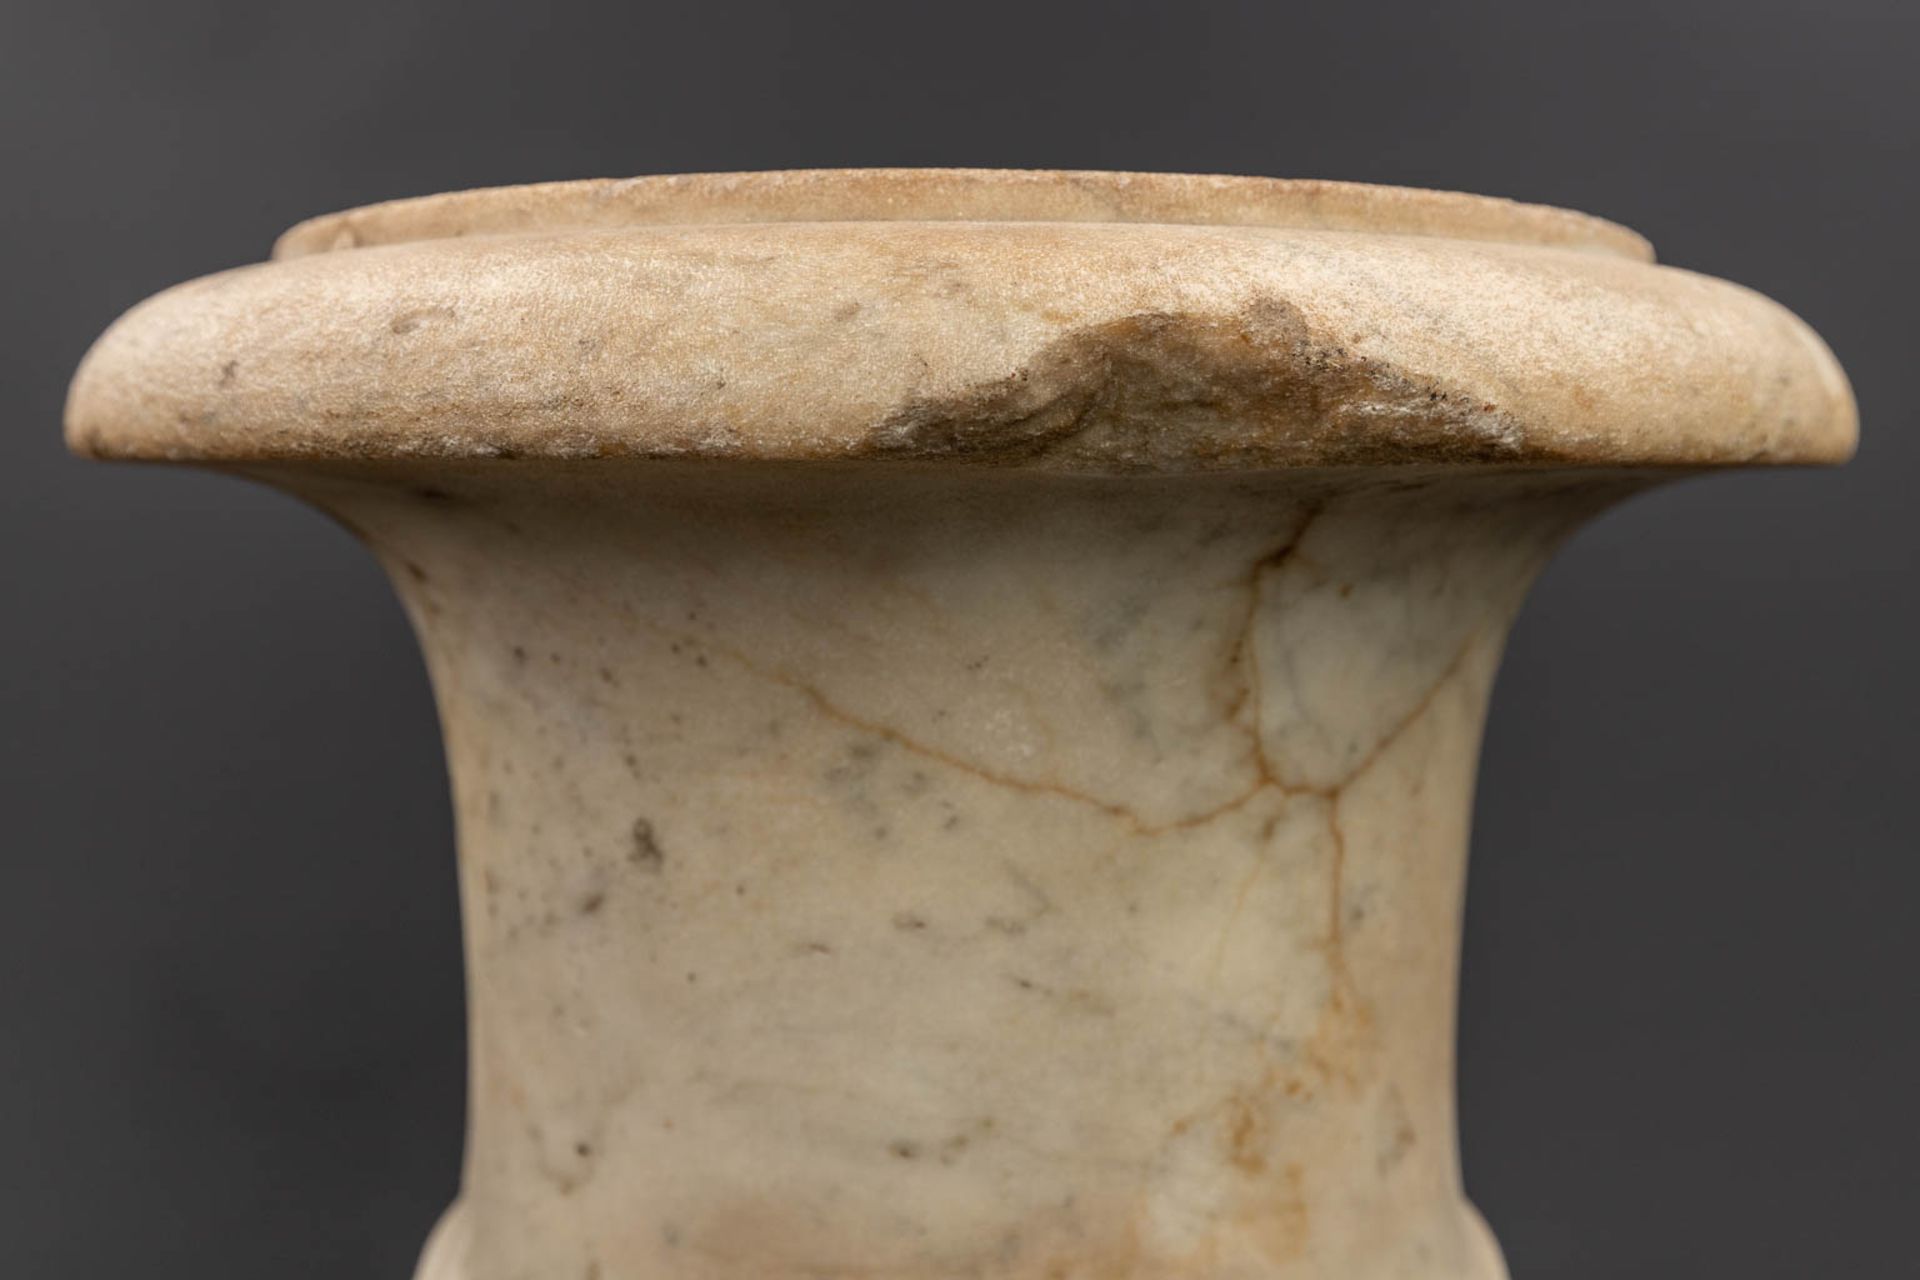 A pair of marble urns 'Medici Vases' made of sculptured marble, 18th C. (H:36 x D:26 cm) - Image 5 of 11